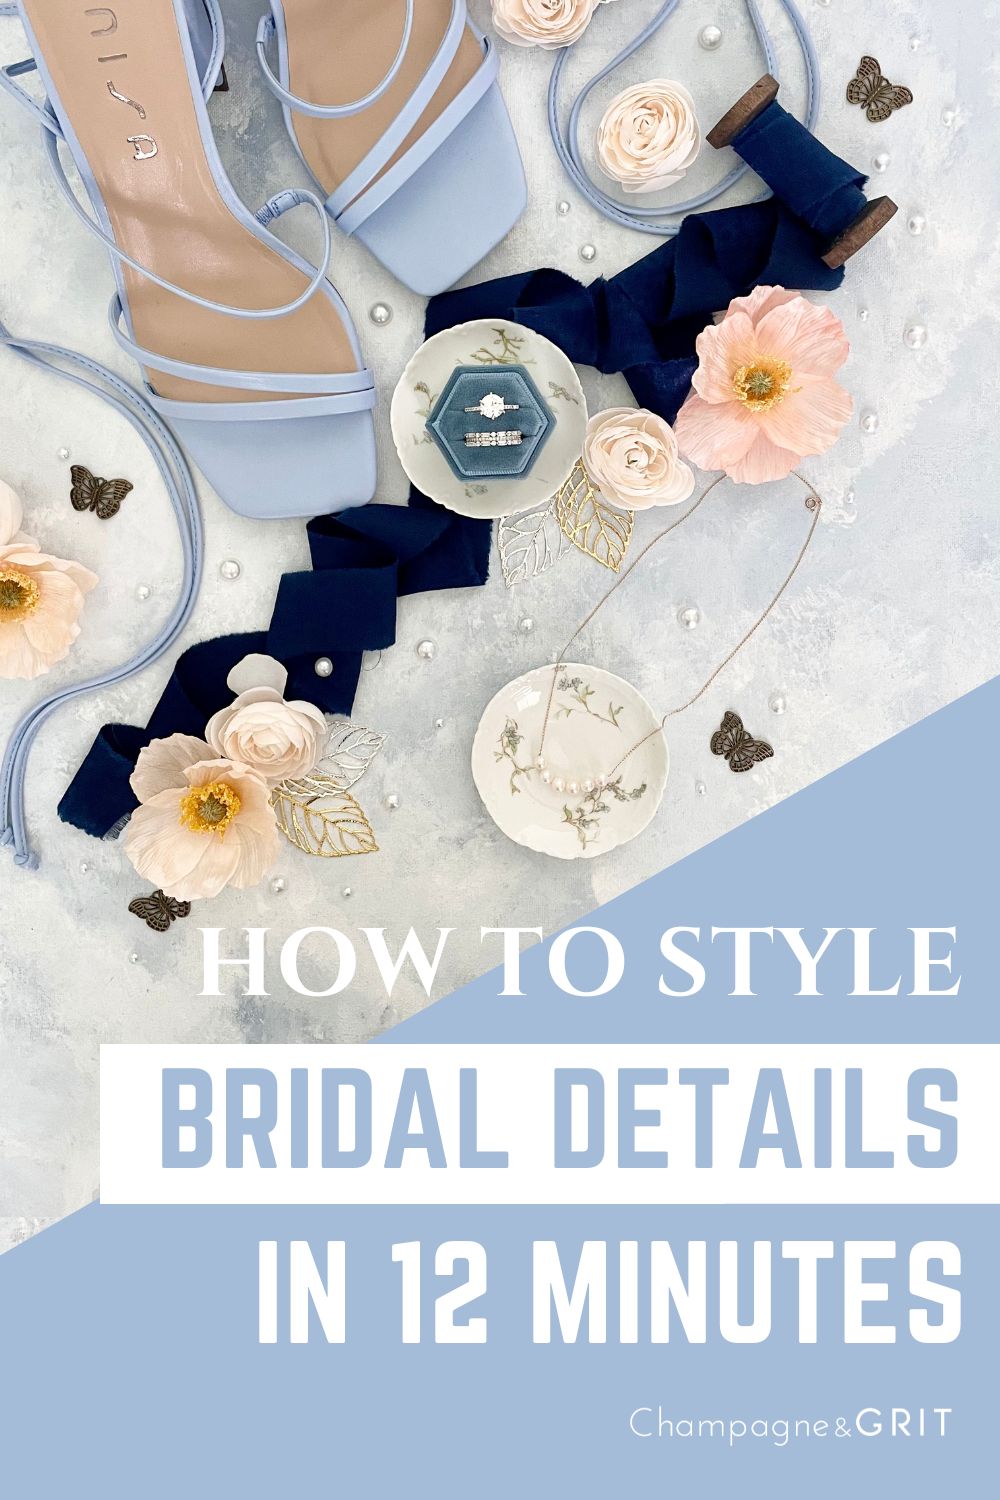 How to Style Bridal Details in 12 Minutes